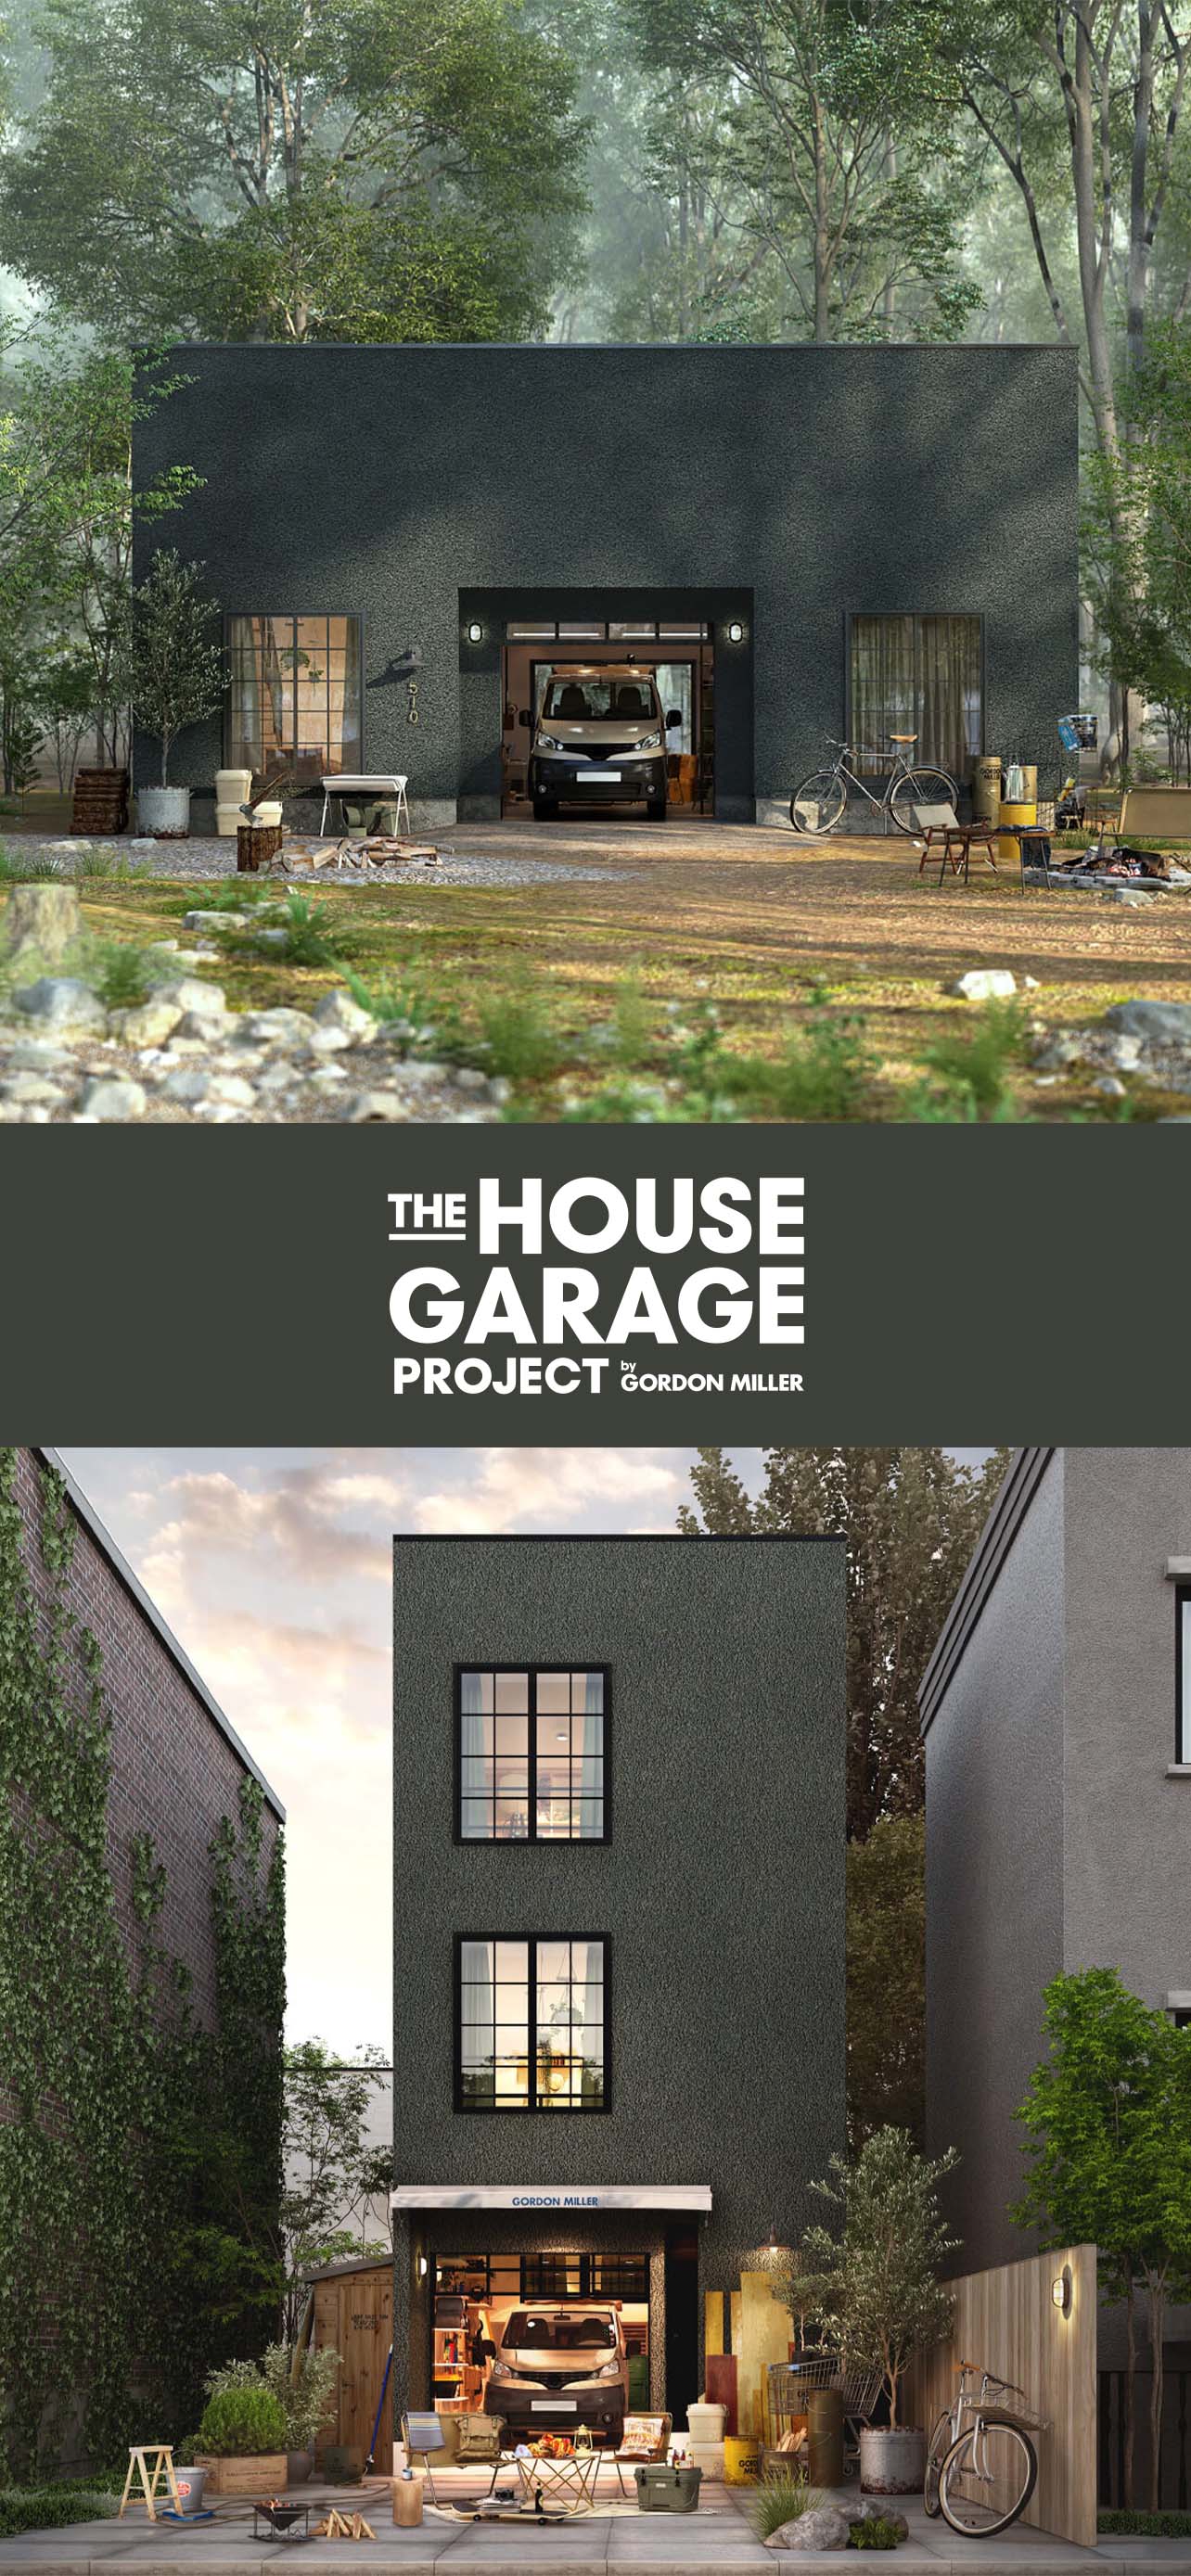 The House Garage Project